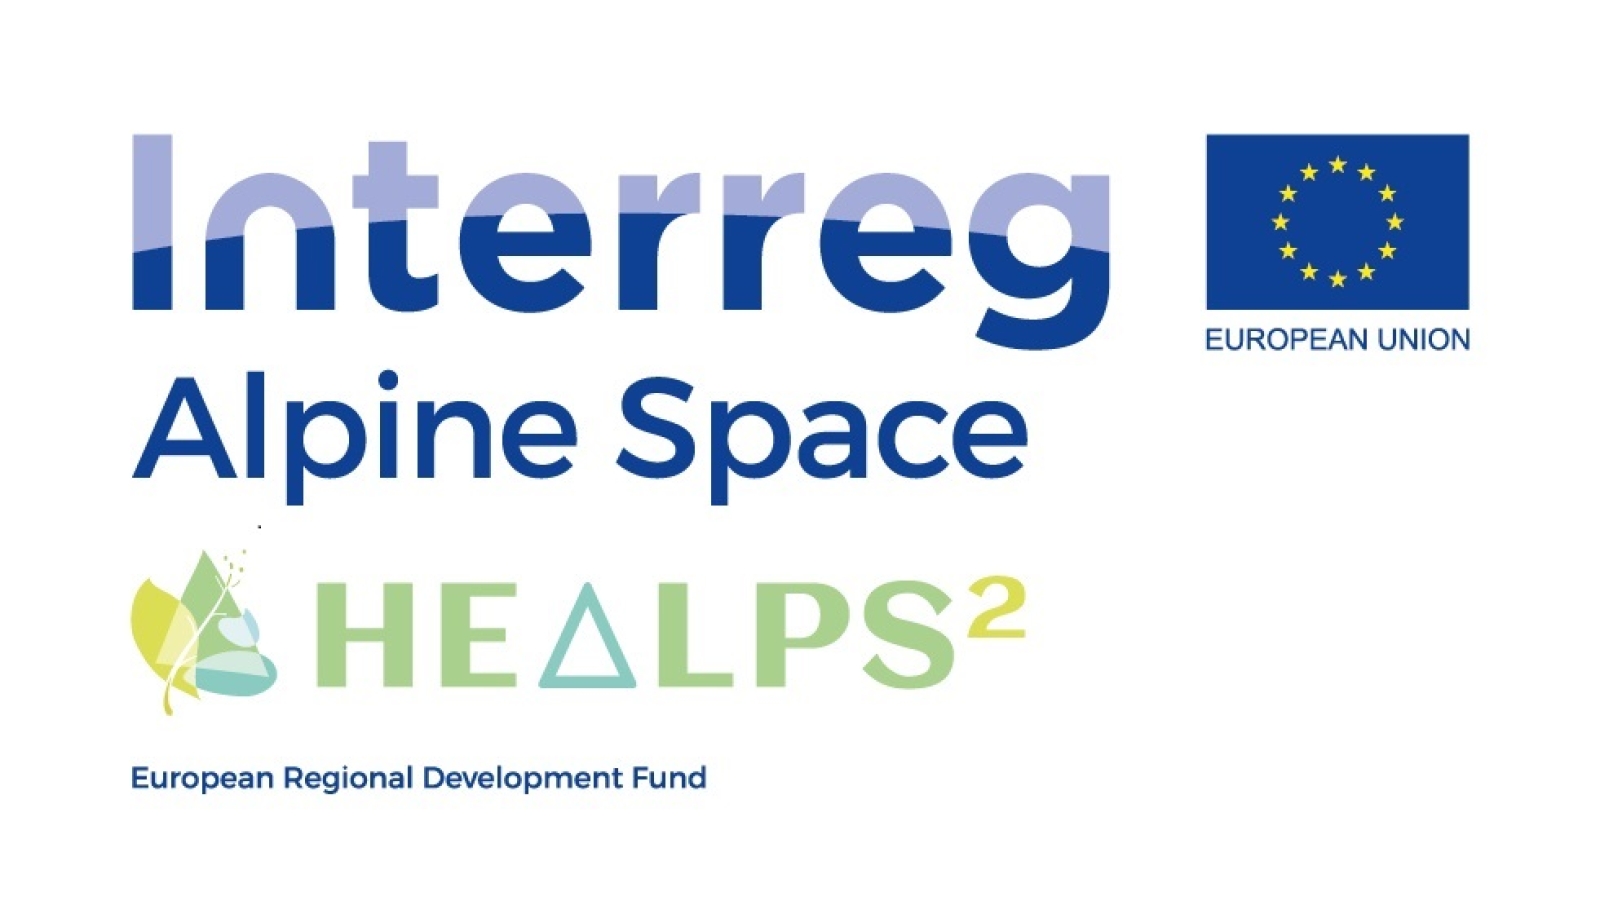 HEALPS2: Health resources in the Alps and Training Material for tourism development